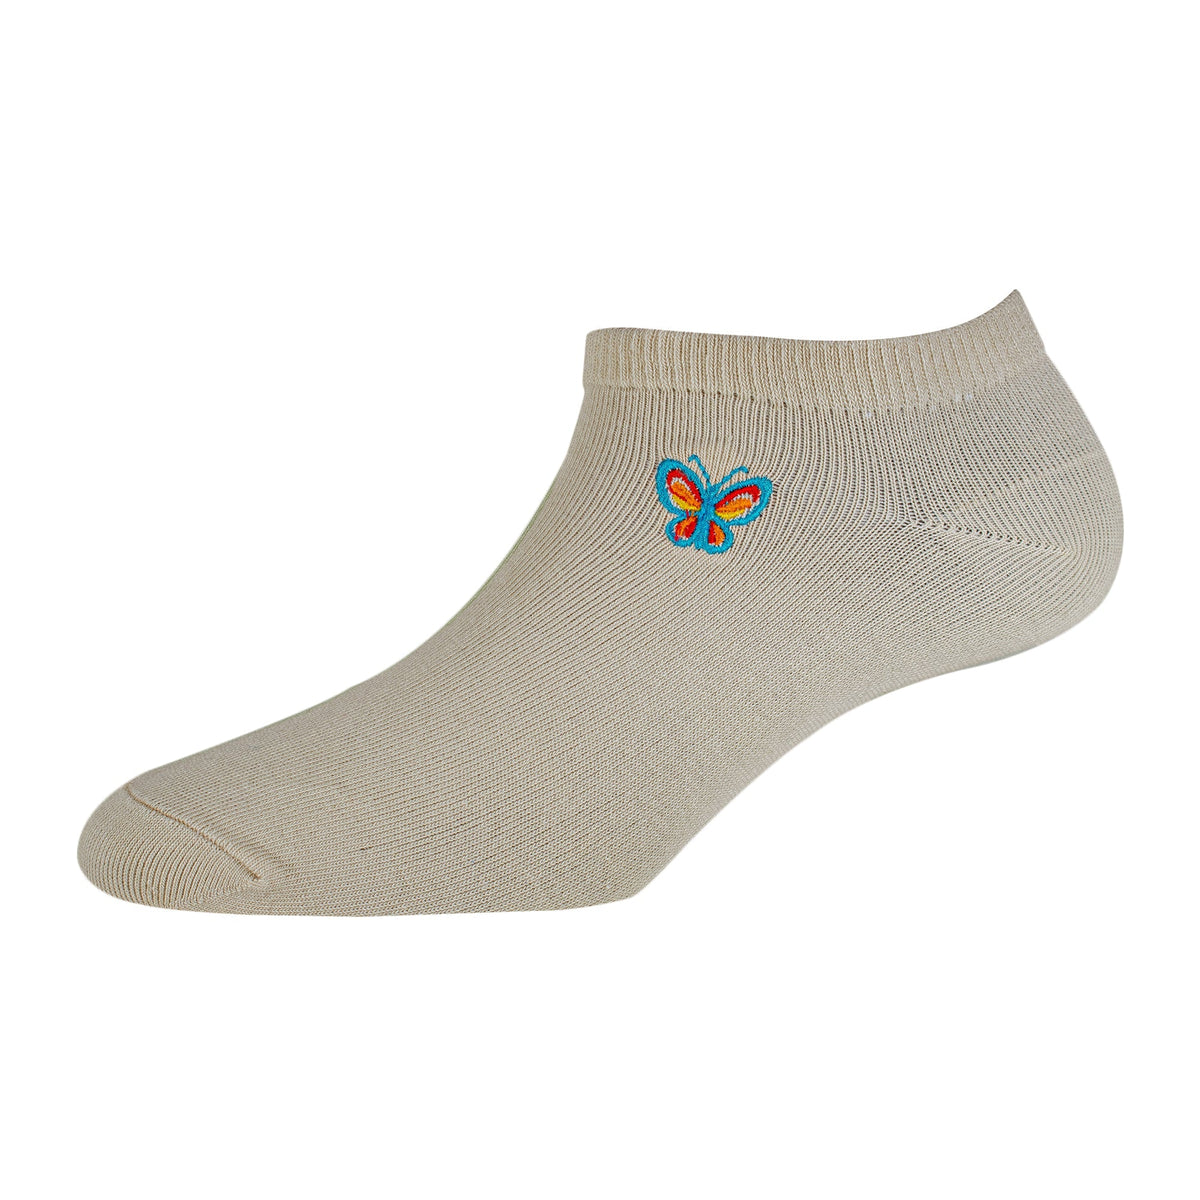 Women's Low Ankle Antibacterial Cotton socks with Embroidery Plain - YW-W1-6002